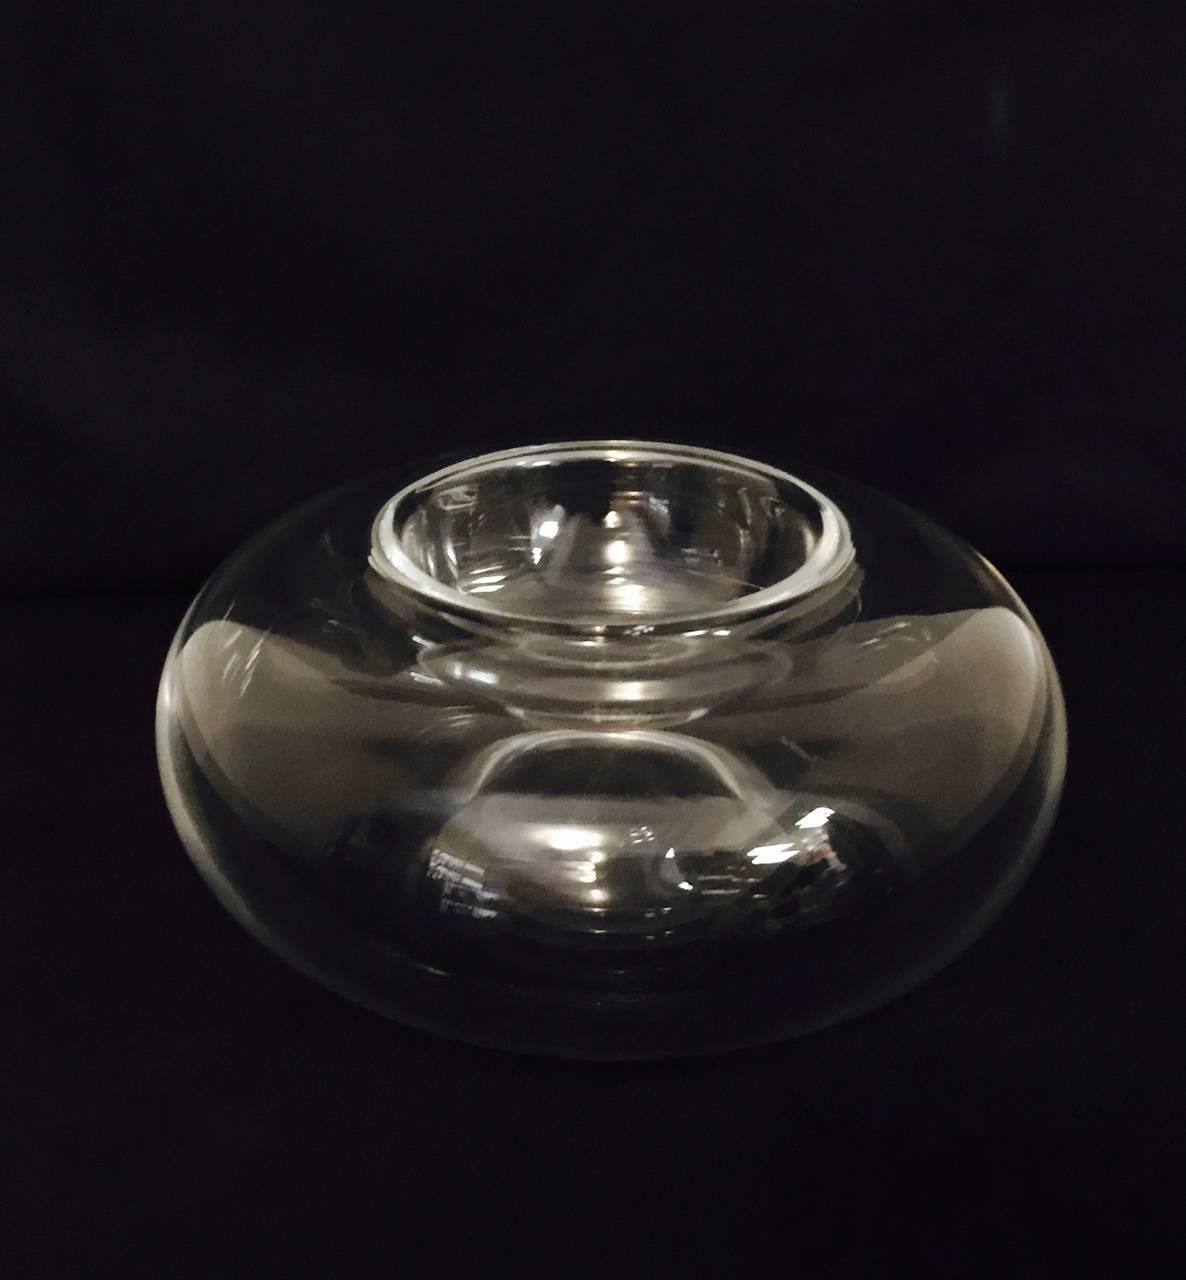 Stunningly elegant Baccarat Caviar dish with a lift out bowl for the caviar, that nestles in the cooling bowl to keep those precious eggs on ice!  Both bowls are etched with Baccarat and the Baccarat France logo. Measures 8 inches wide by 3.5 inches